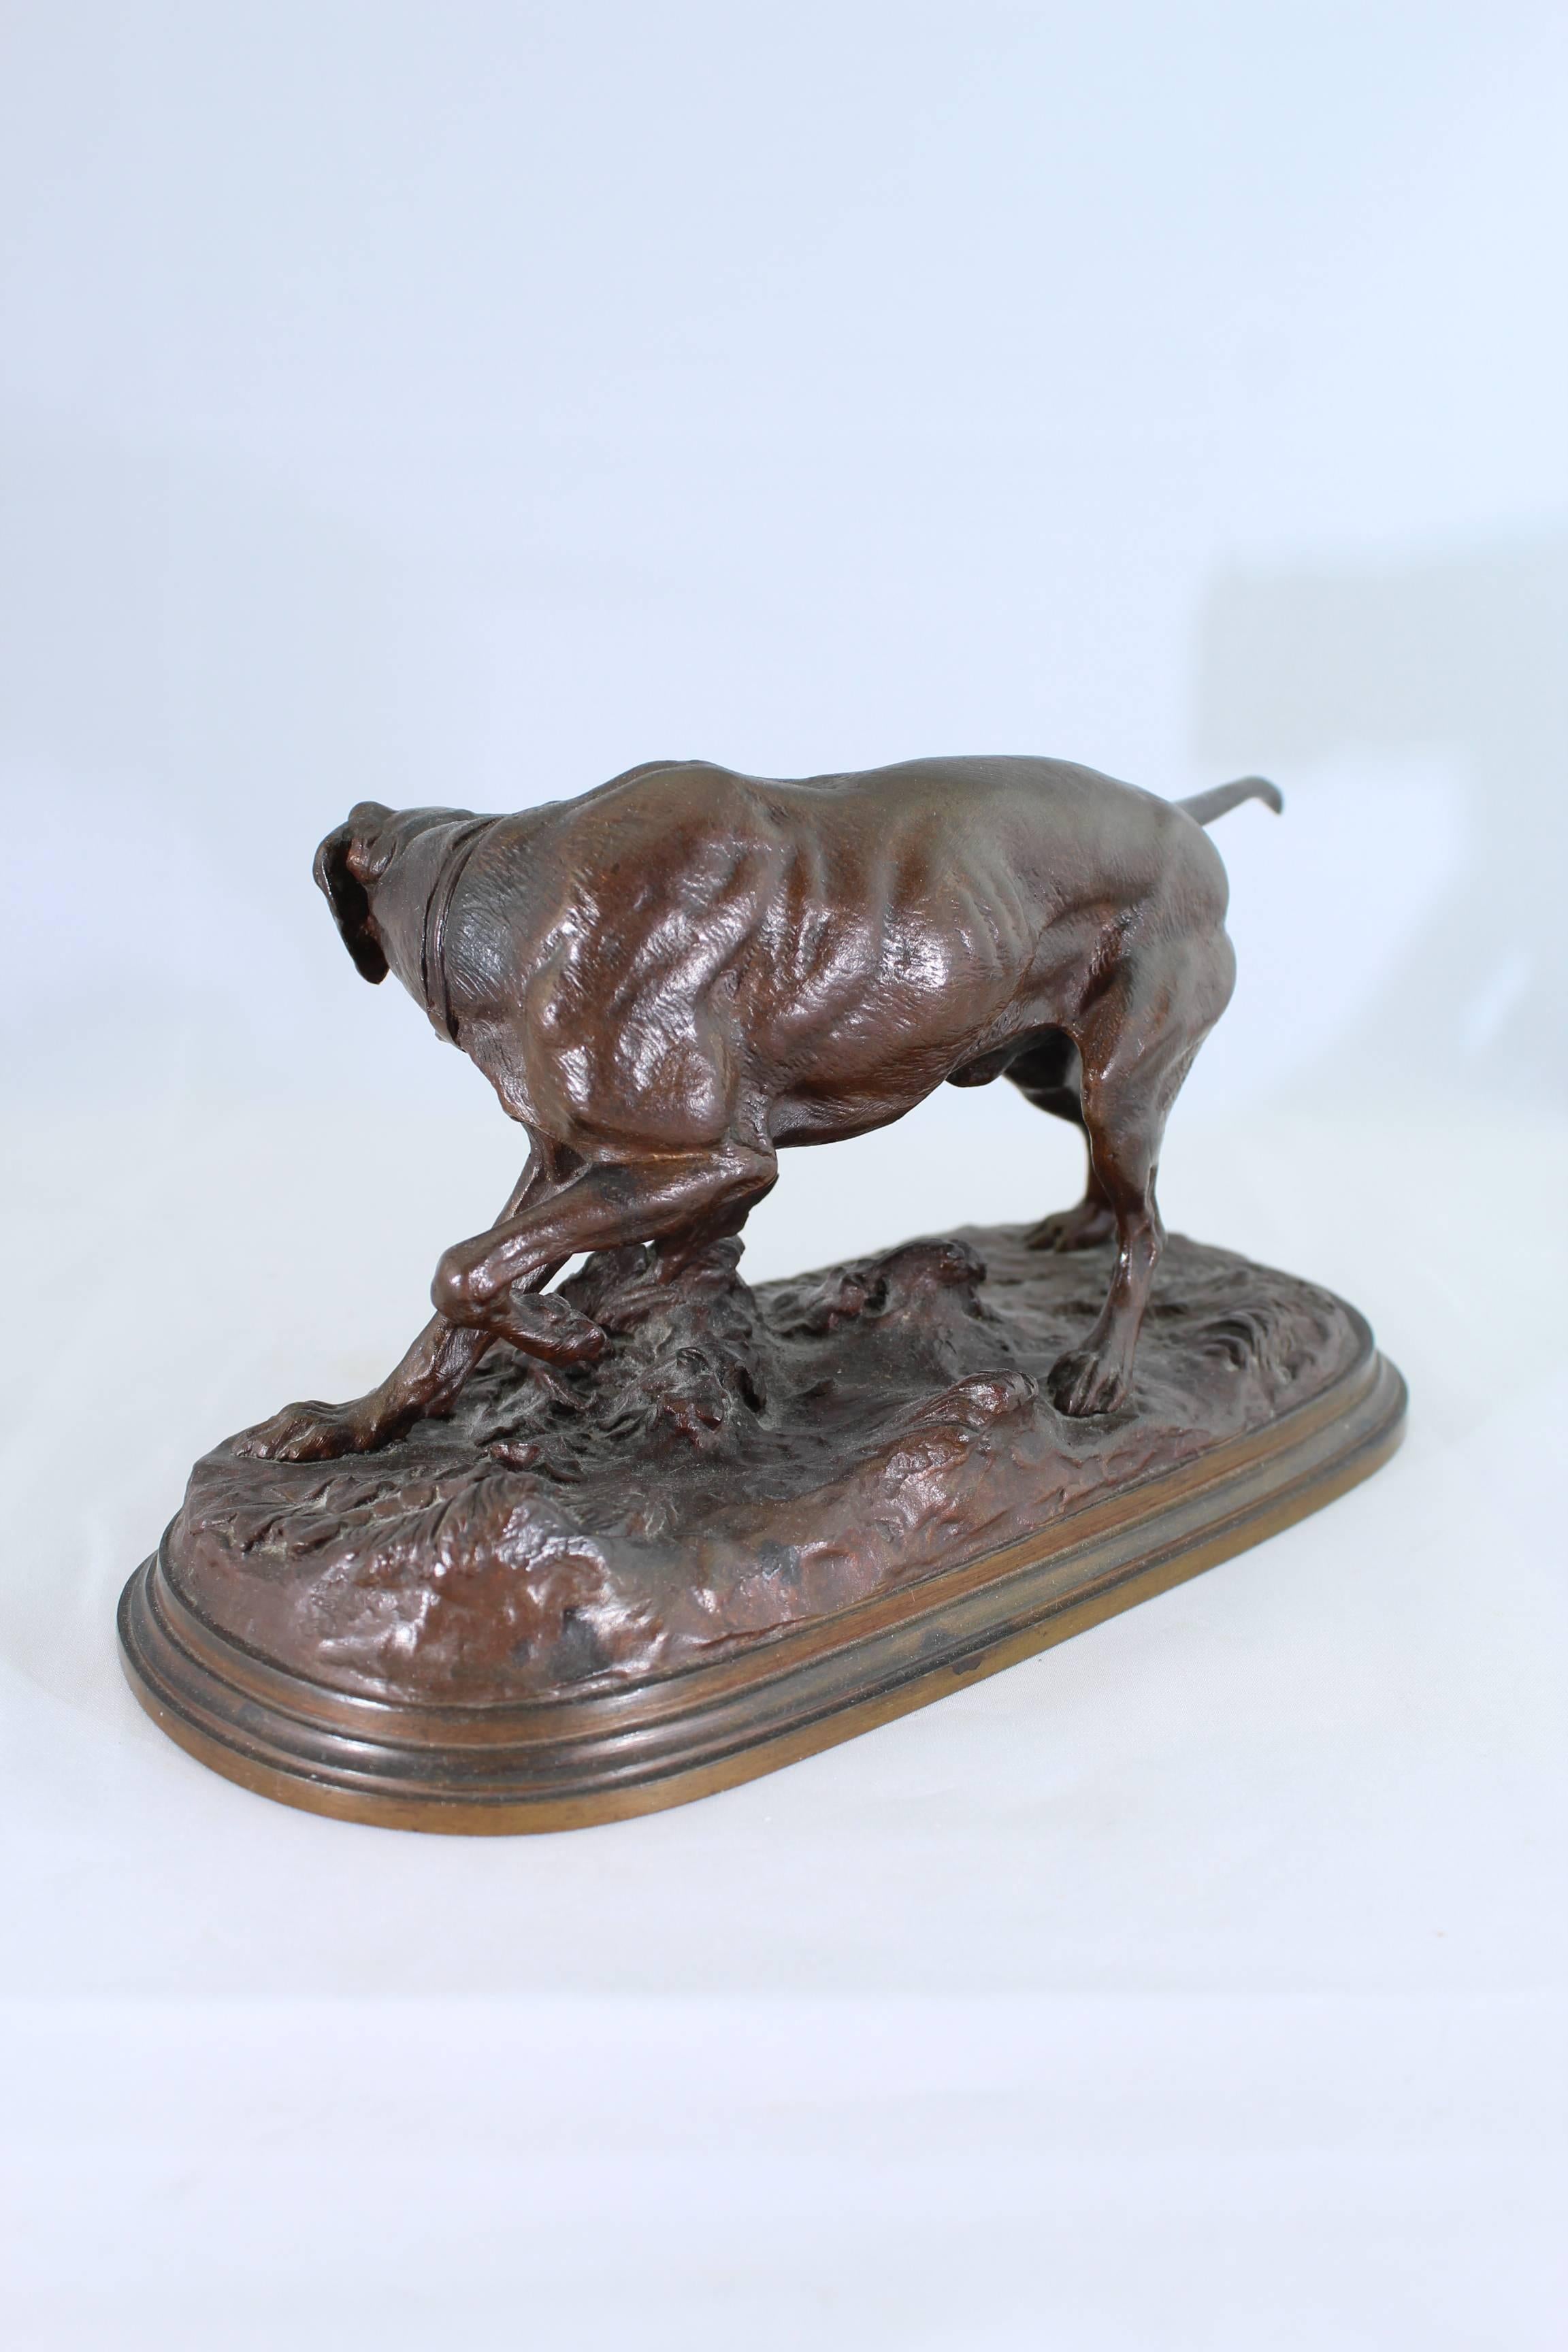 Pierre Jules Mene (French, 1810-1879) 
Chien Braque a la Feuille 
Bronze with brown patina 
9.5 inches (24 cm) long 
5 inches (12.7 cm) high 

Inscribed on base: PJ Mene

Condition: Excellent 

PROPERTY FROM THE COLLECTION OF STANLEY G. AND BARBARA